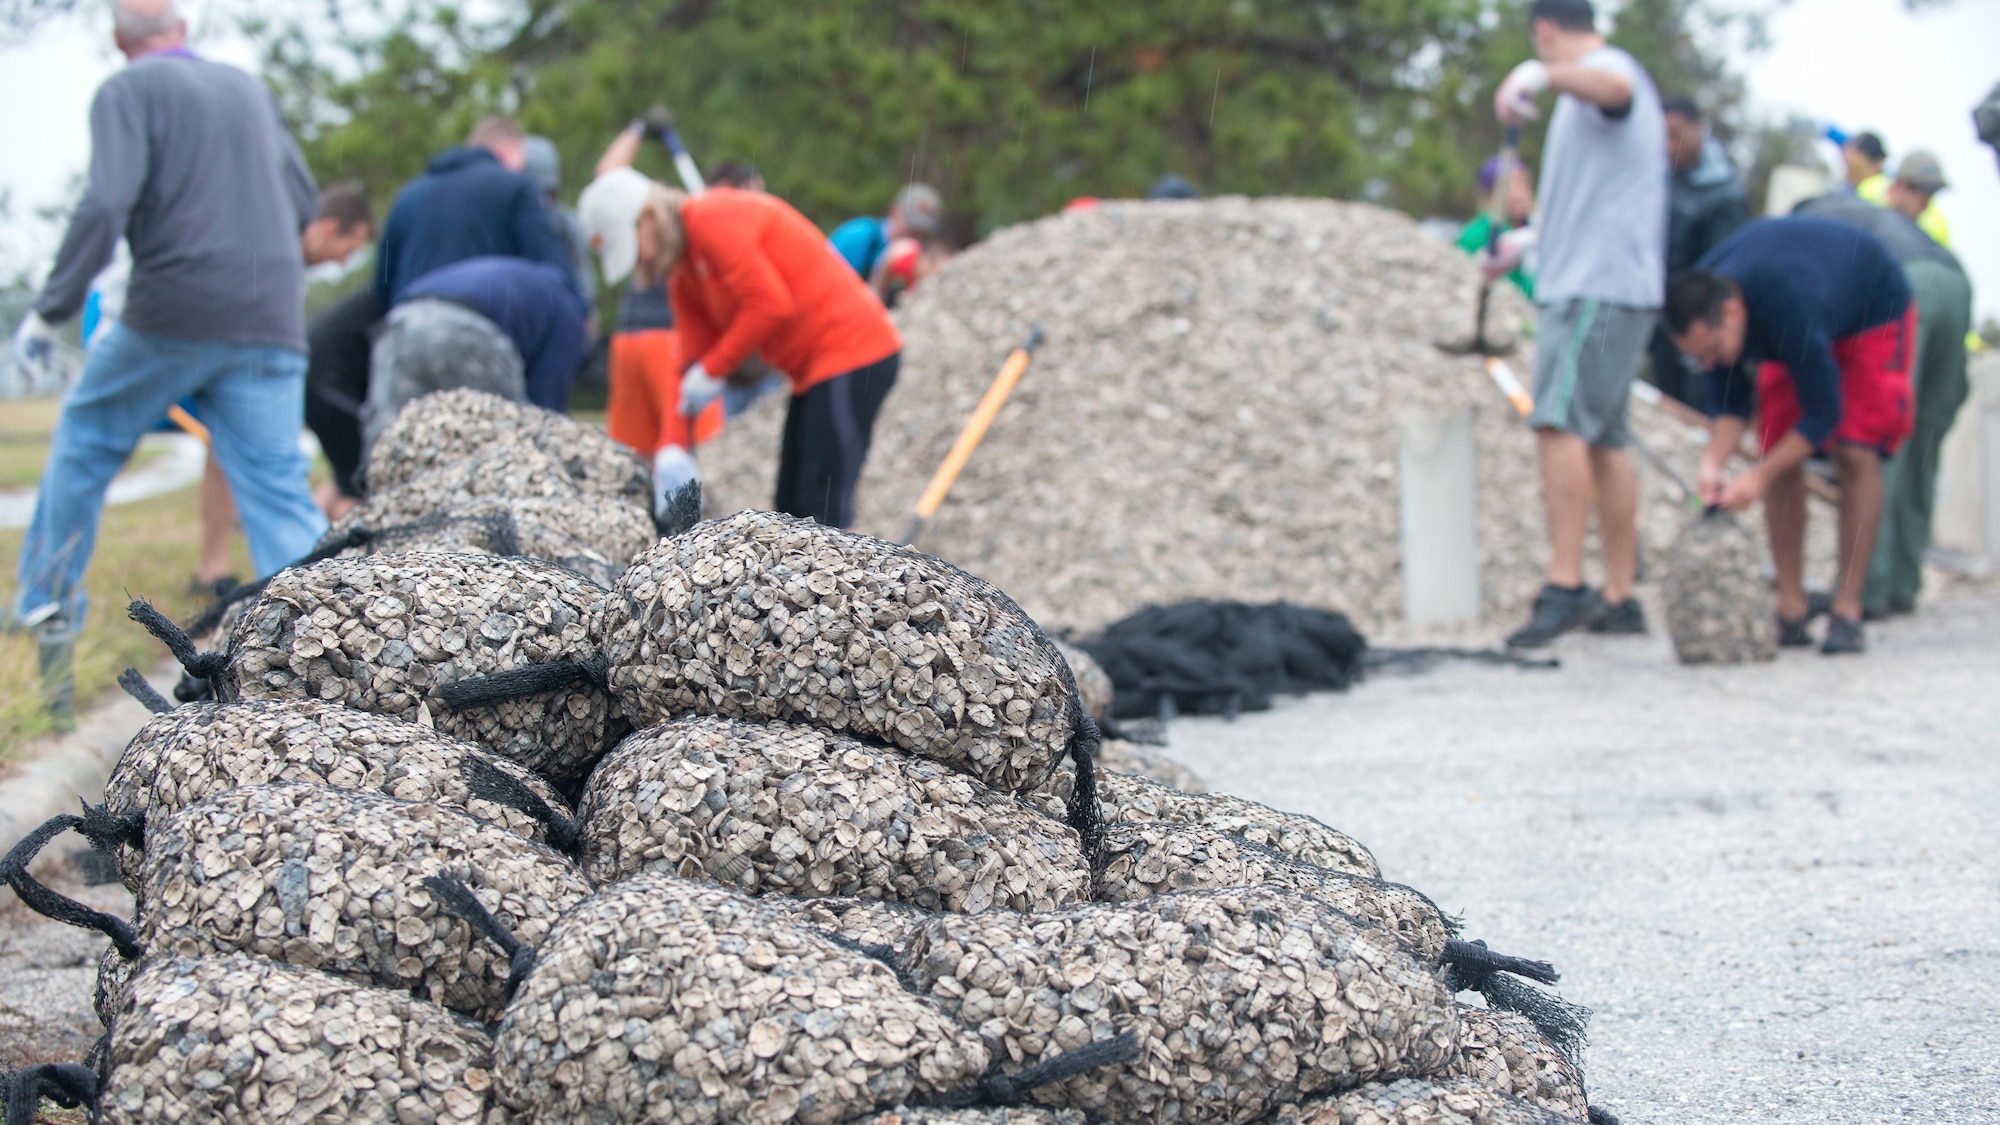 Bags of seashells wait to be moved to construct an oyster reef at MacDill Air Force Base, Fla., Dec. 14, 2018.